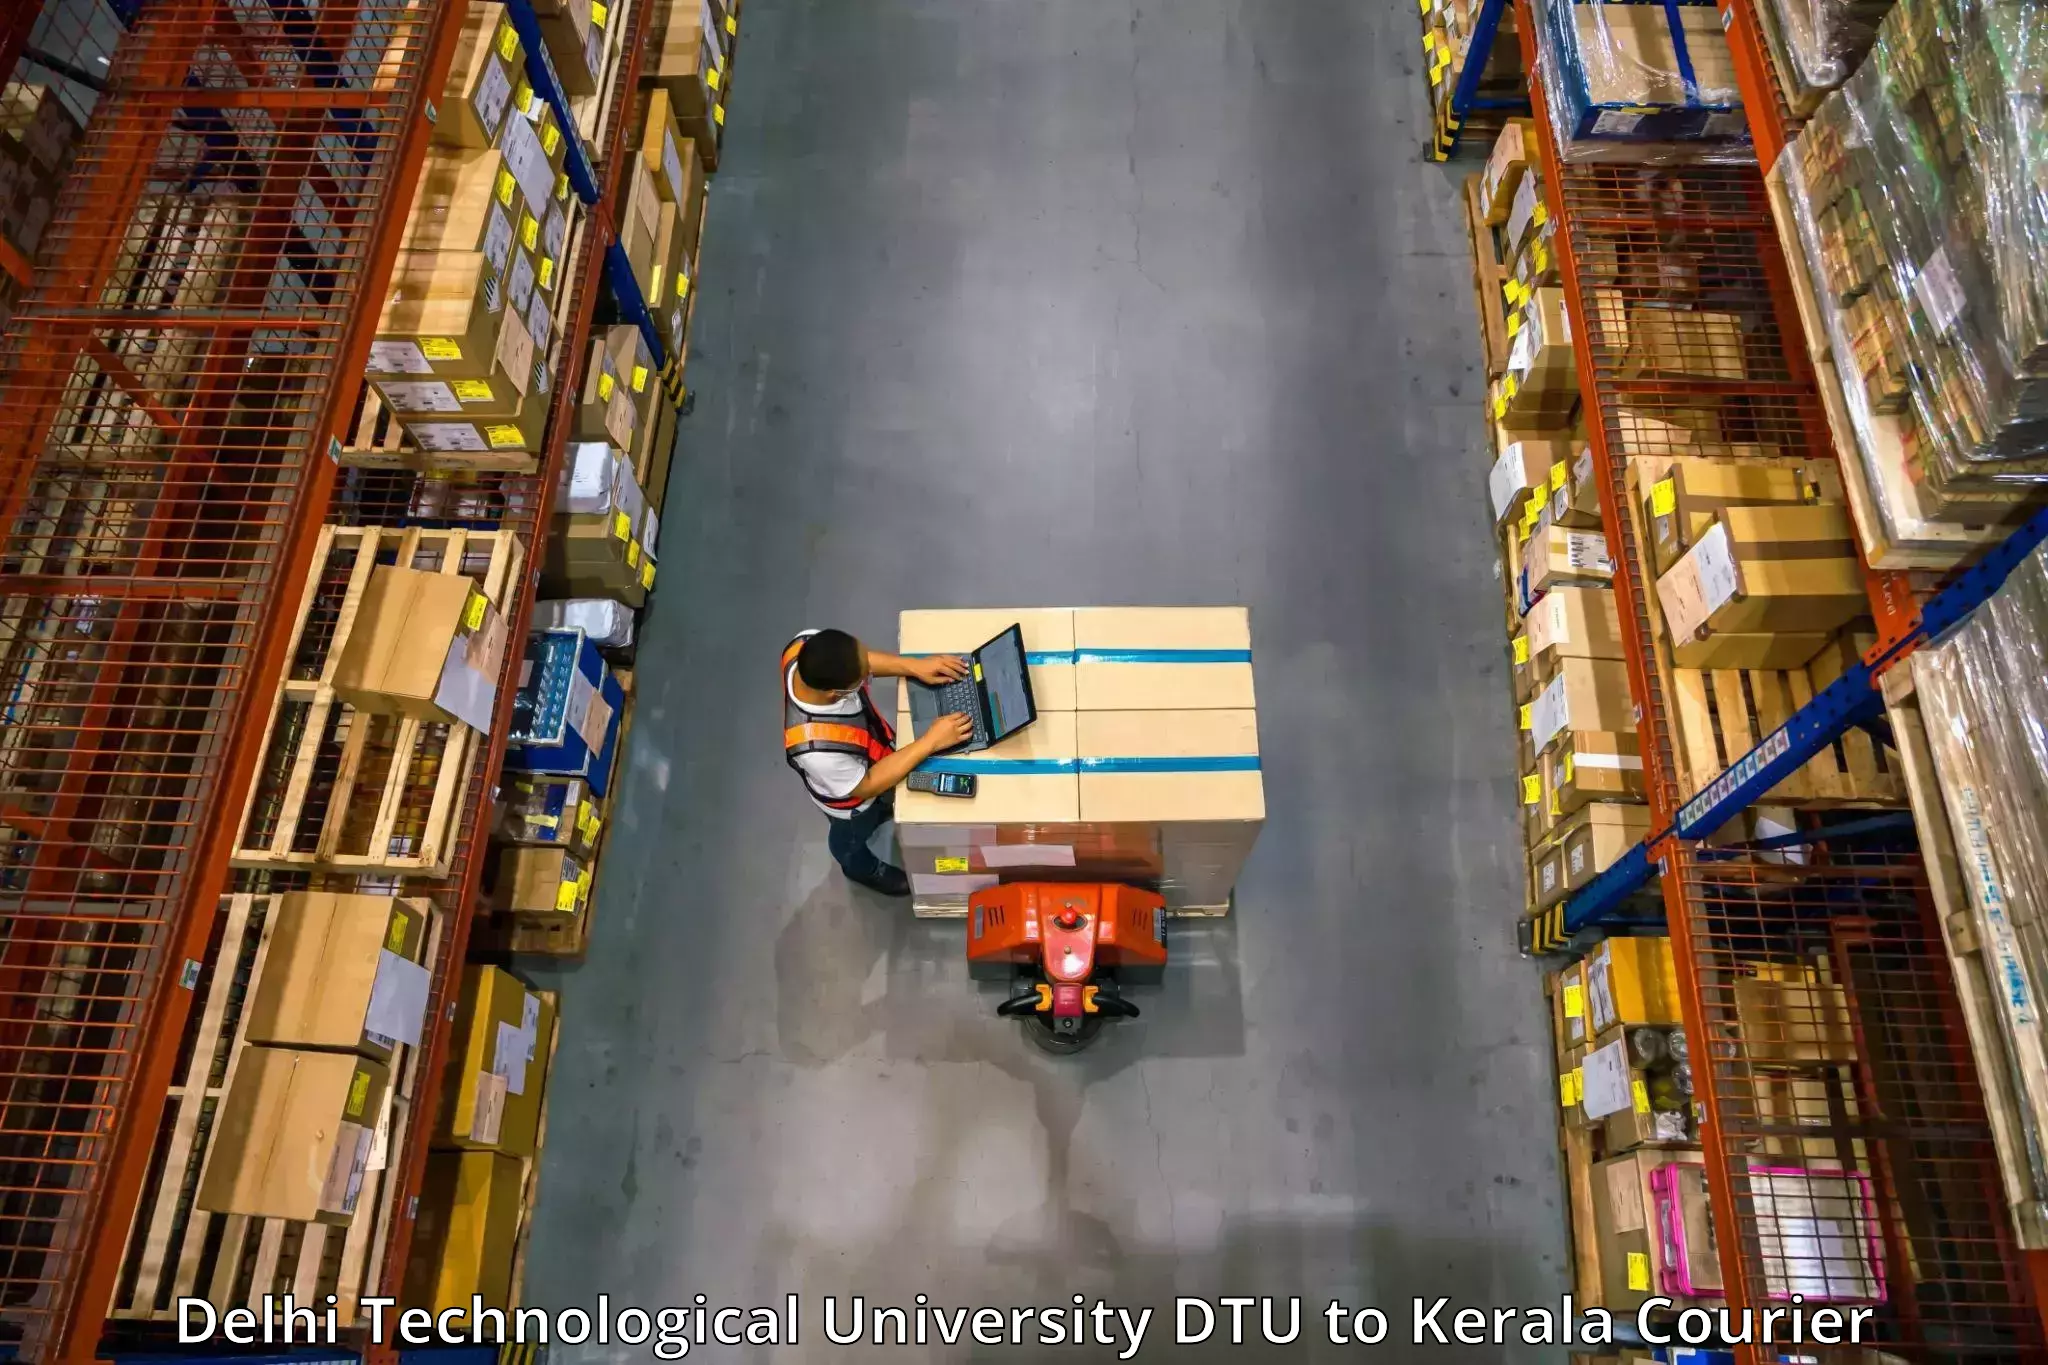 Home relocation services Delhi Technological University DTU to Cochin University of Science and Technology